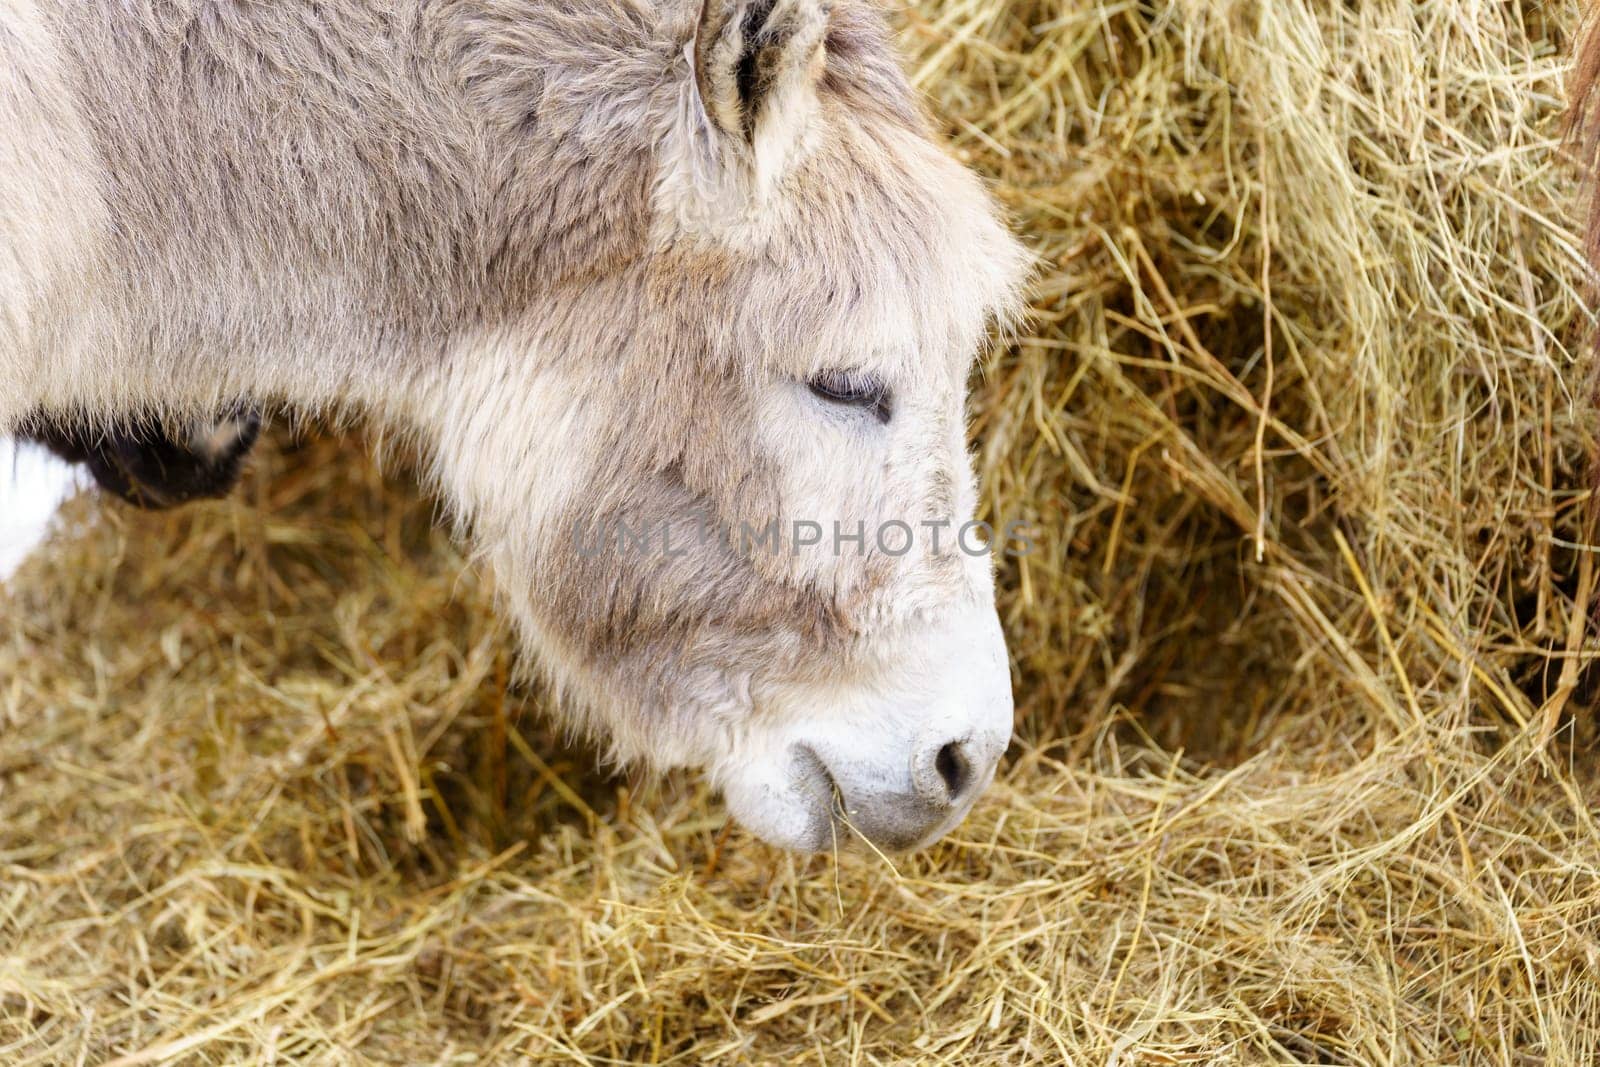 Donkey feeds on hay, showcasing its strength and elegance in the peaceful setting.